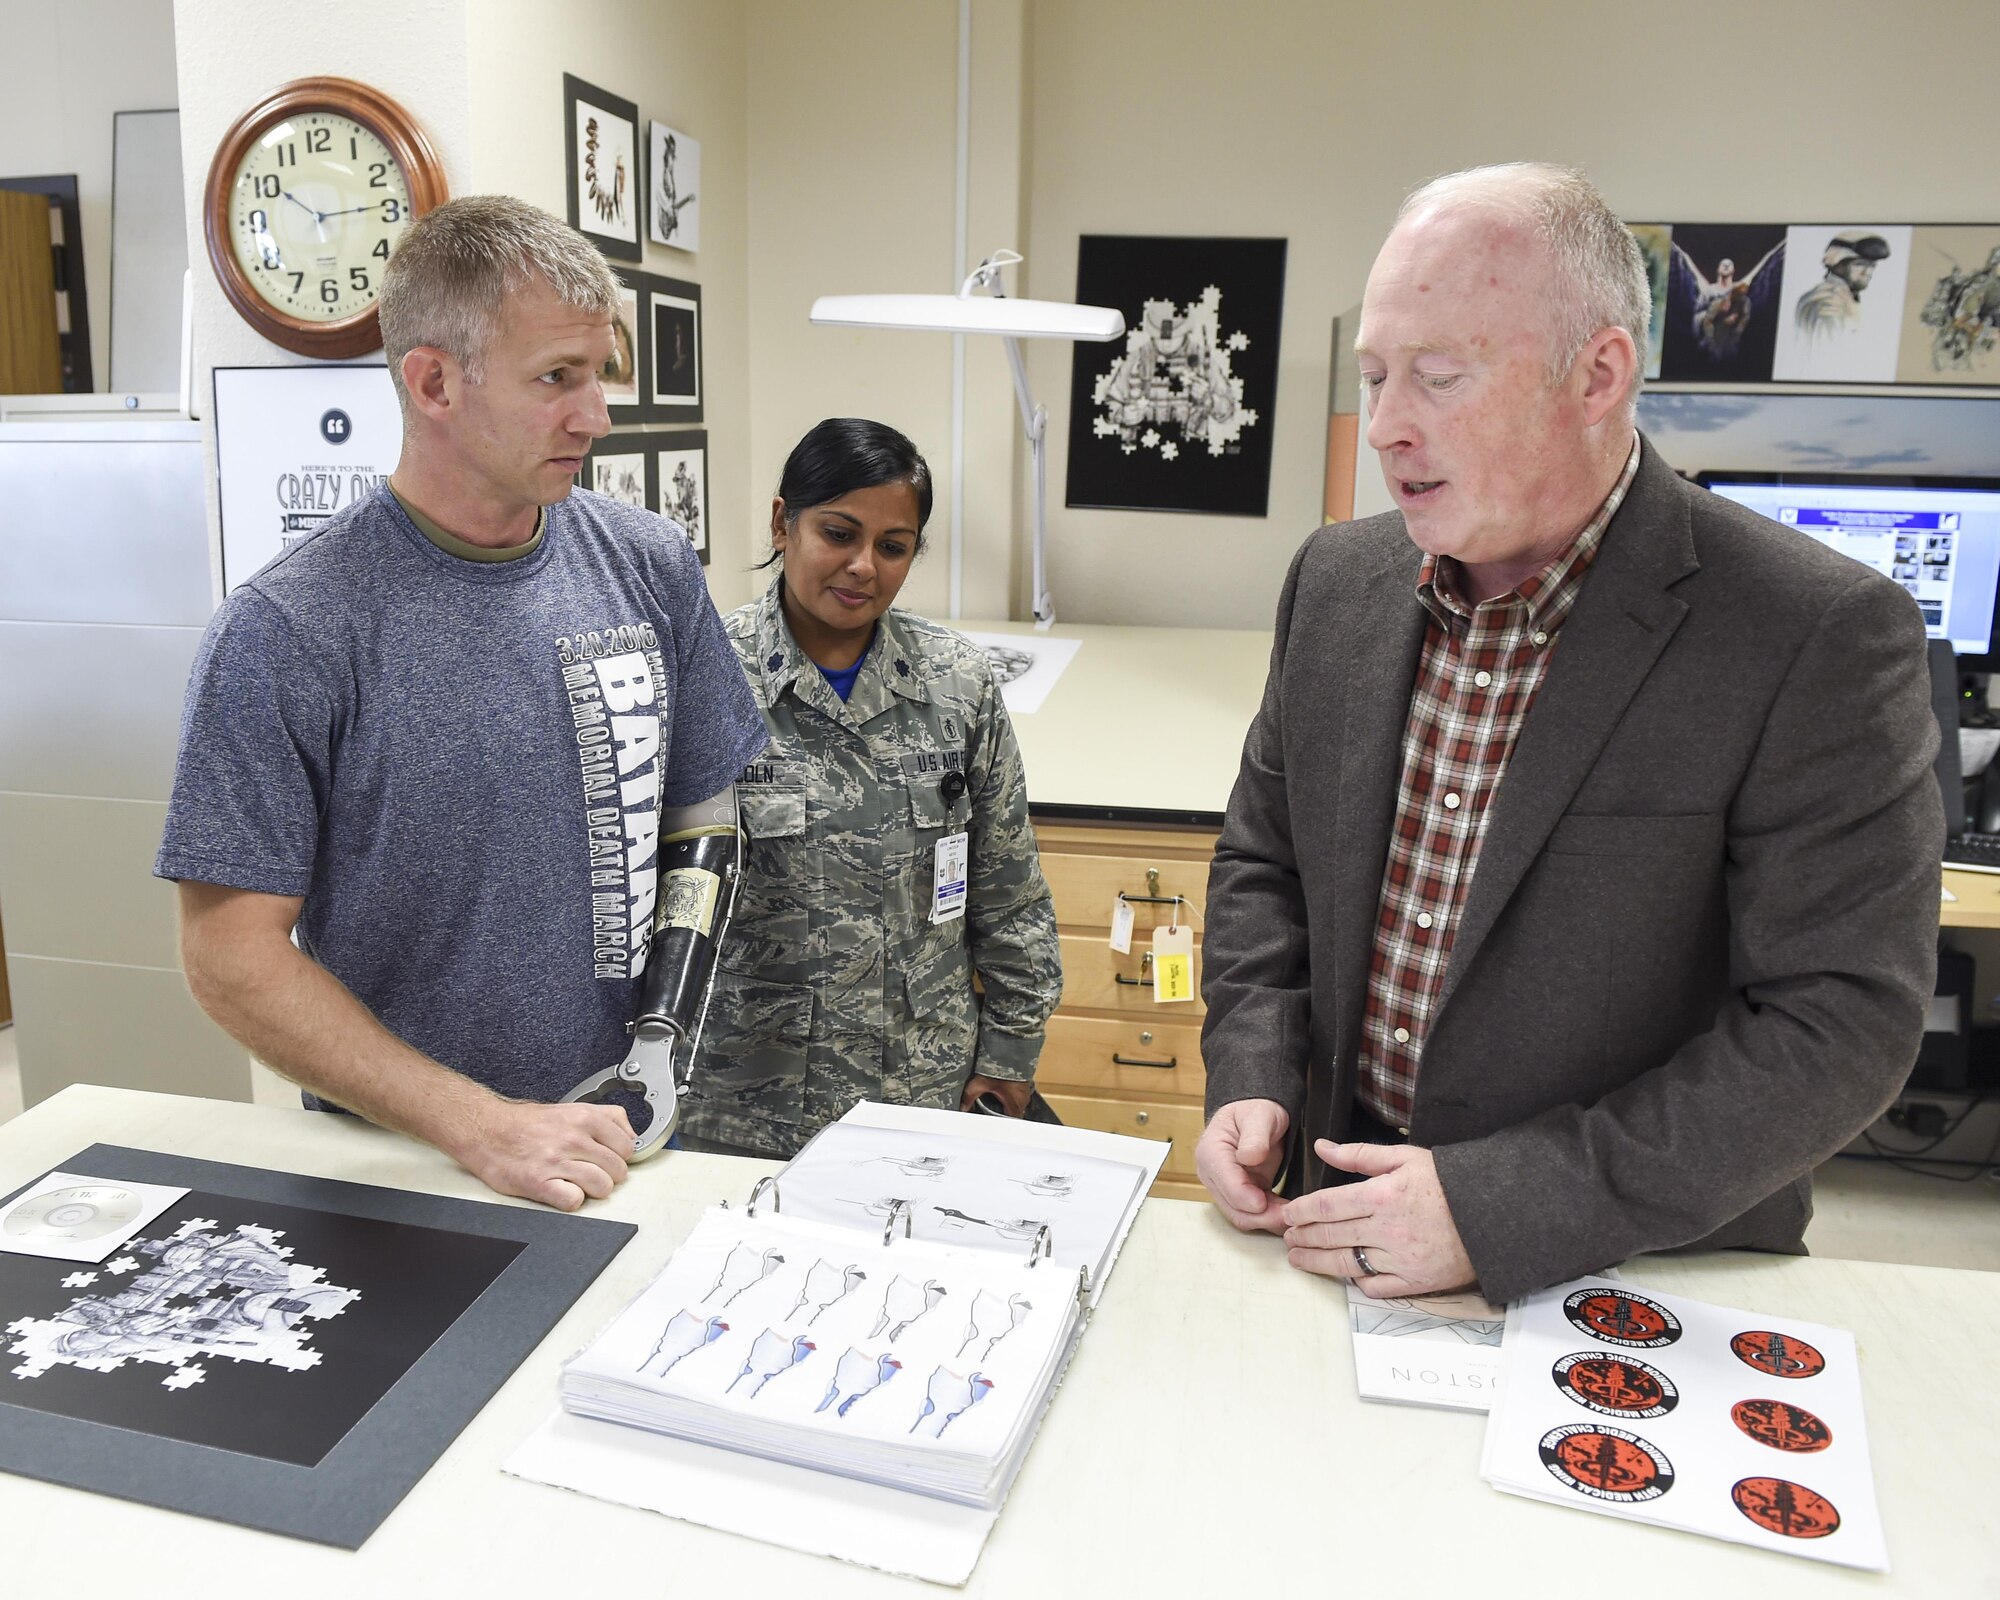 Robert Shelley, 59th Medical Wing graphics illustrator, explains some of the projects the medical illustrations department has done to Lt. Col. Kenneth Dwyer, patient and Special Forces officer assigned to U.S. Army 1st Special Forces Command (Airborne), and Lt. Col. (Dr.) Ketu Lincoln, 59th MDW maxillofacial prosthodontic fellow, at Wilford Hall Ambulatory Surgical Center on Joint Base San Antonio-Lackland, Texas, Nov. 18, 2016. Shelley also sketched the unit crest for Dwyer's prosthetic eye. (U.S. Air Force photo/Staff Sgt. Michael Ellis)